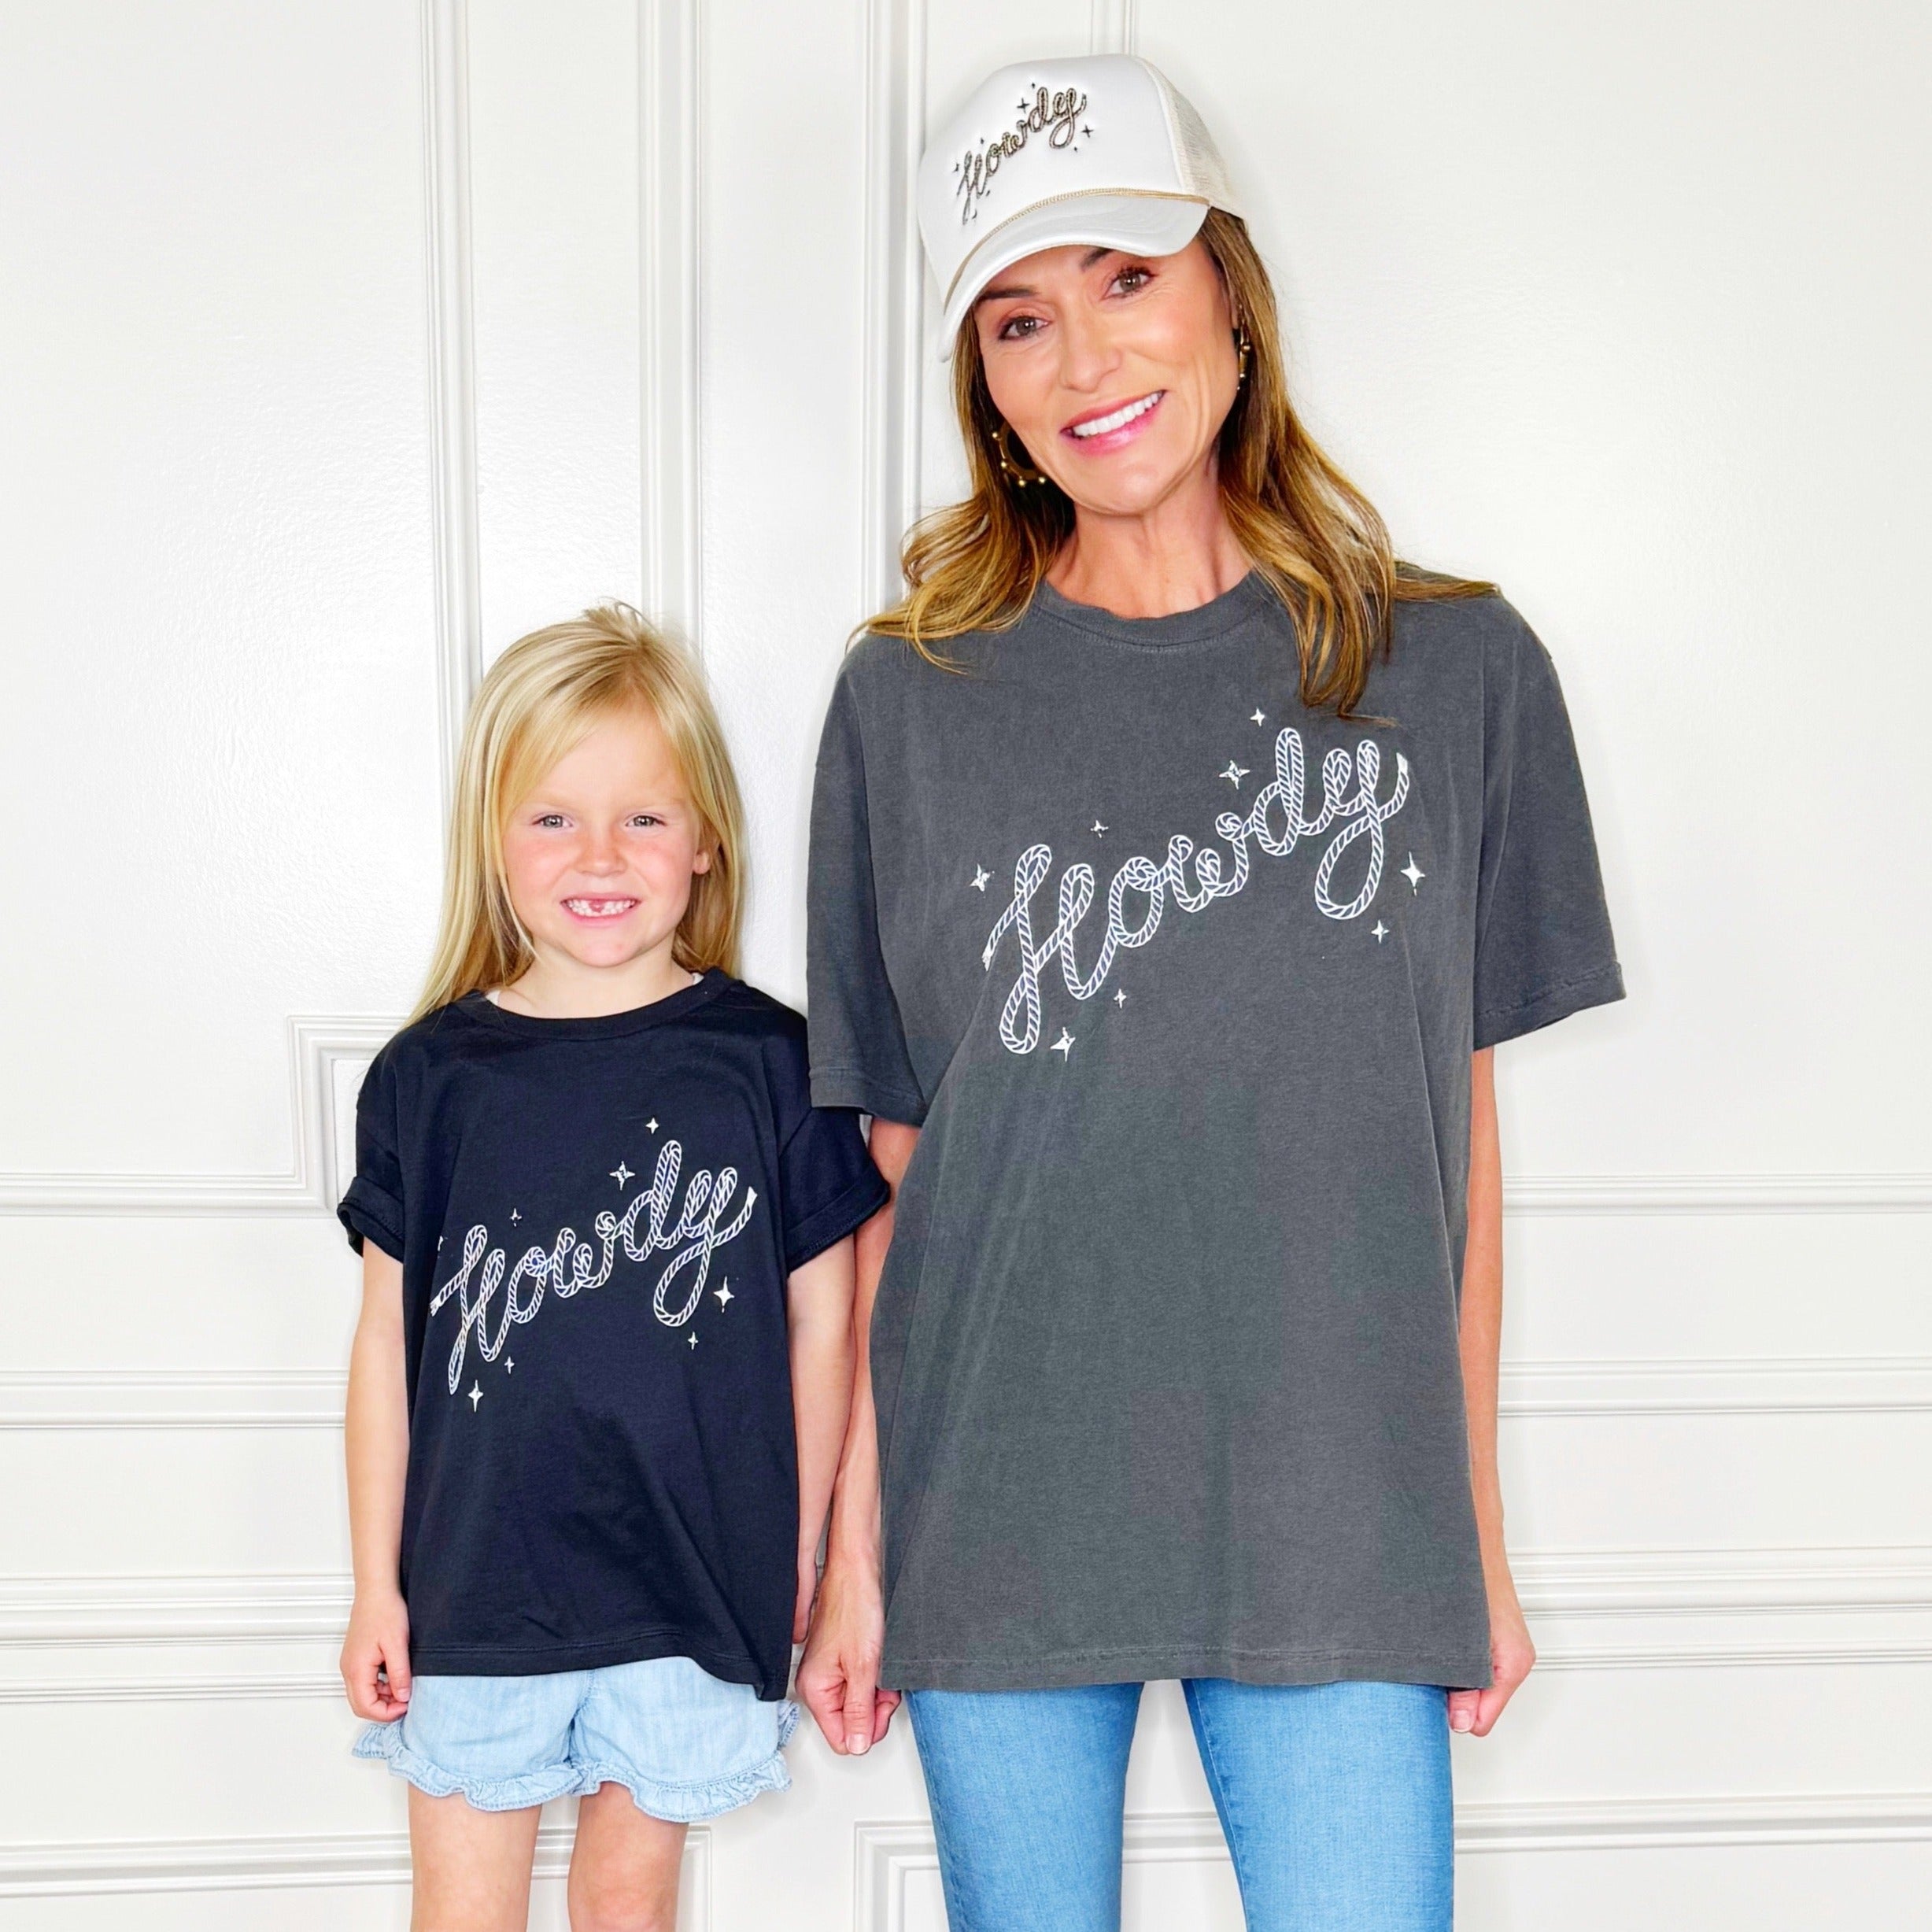 Rope Howdy Youth & Adult Tee